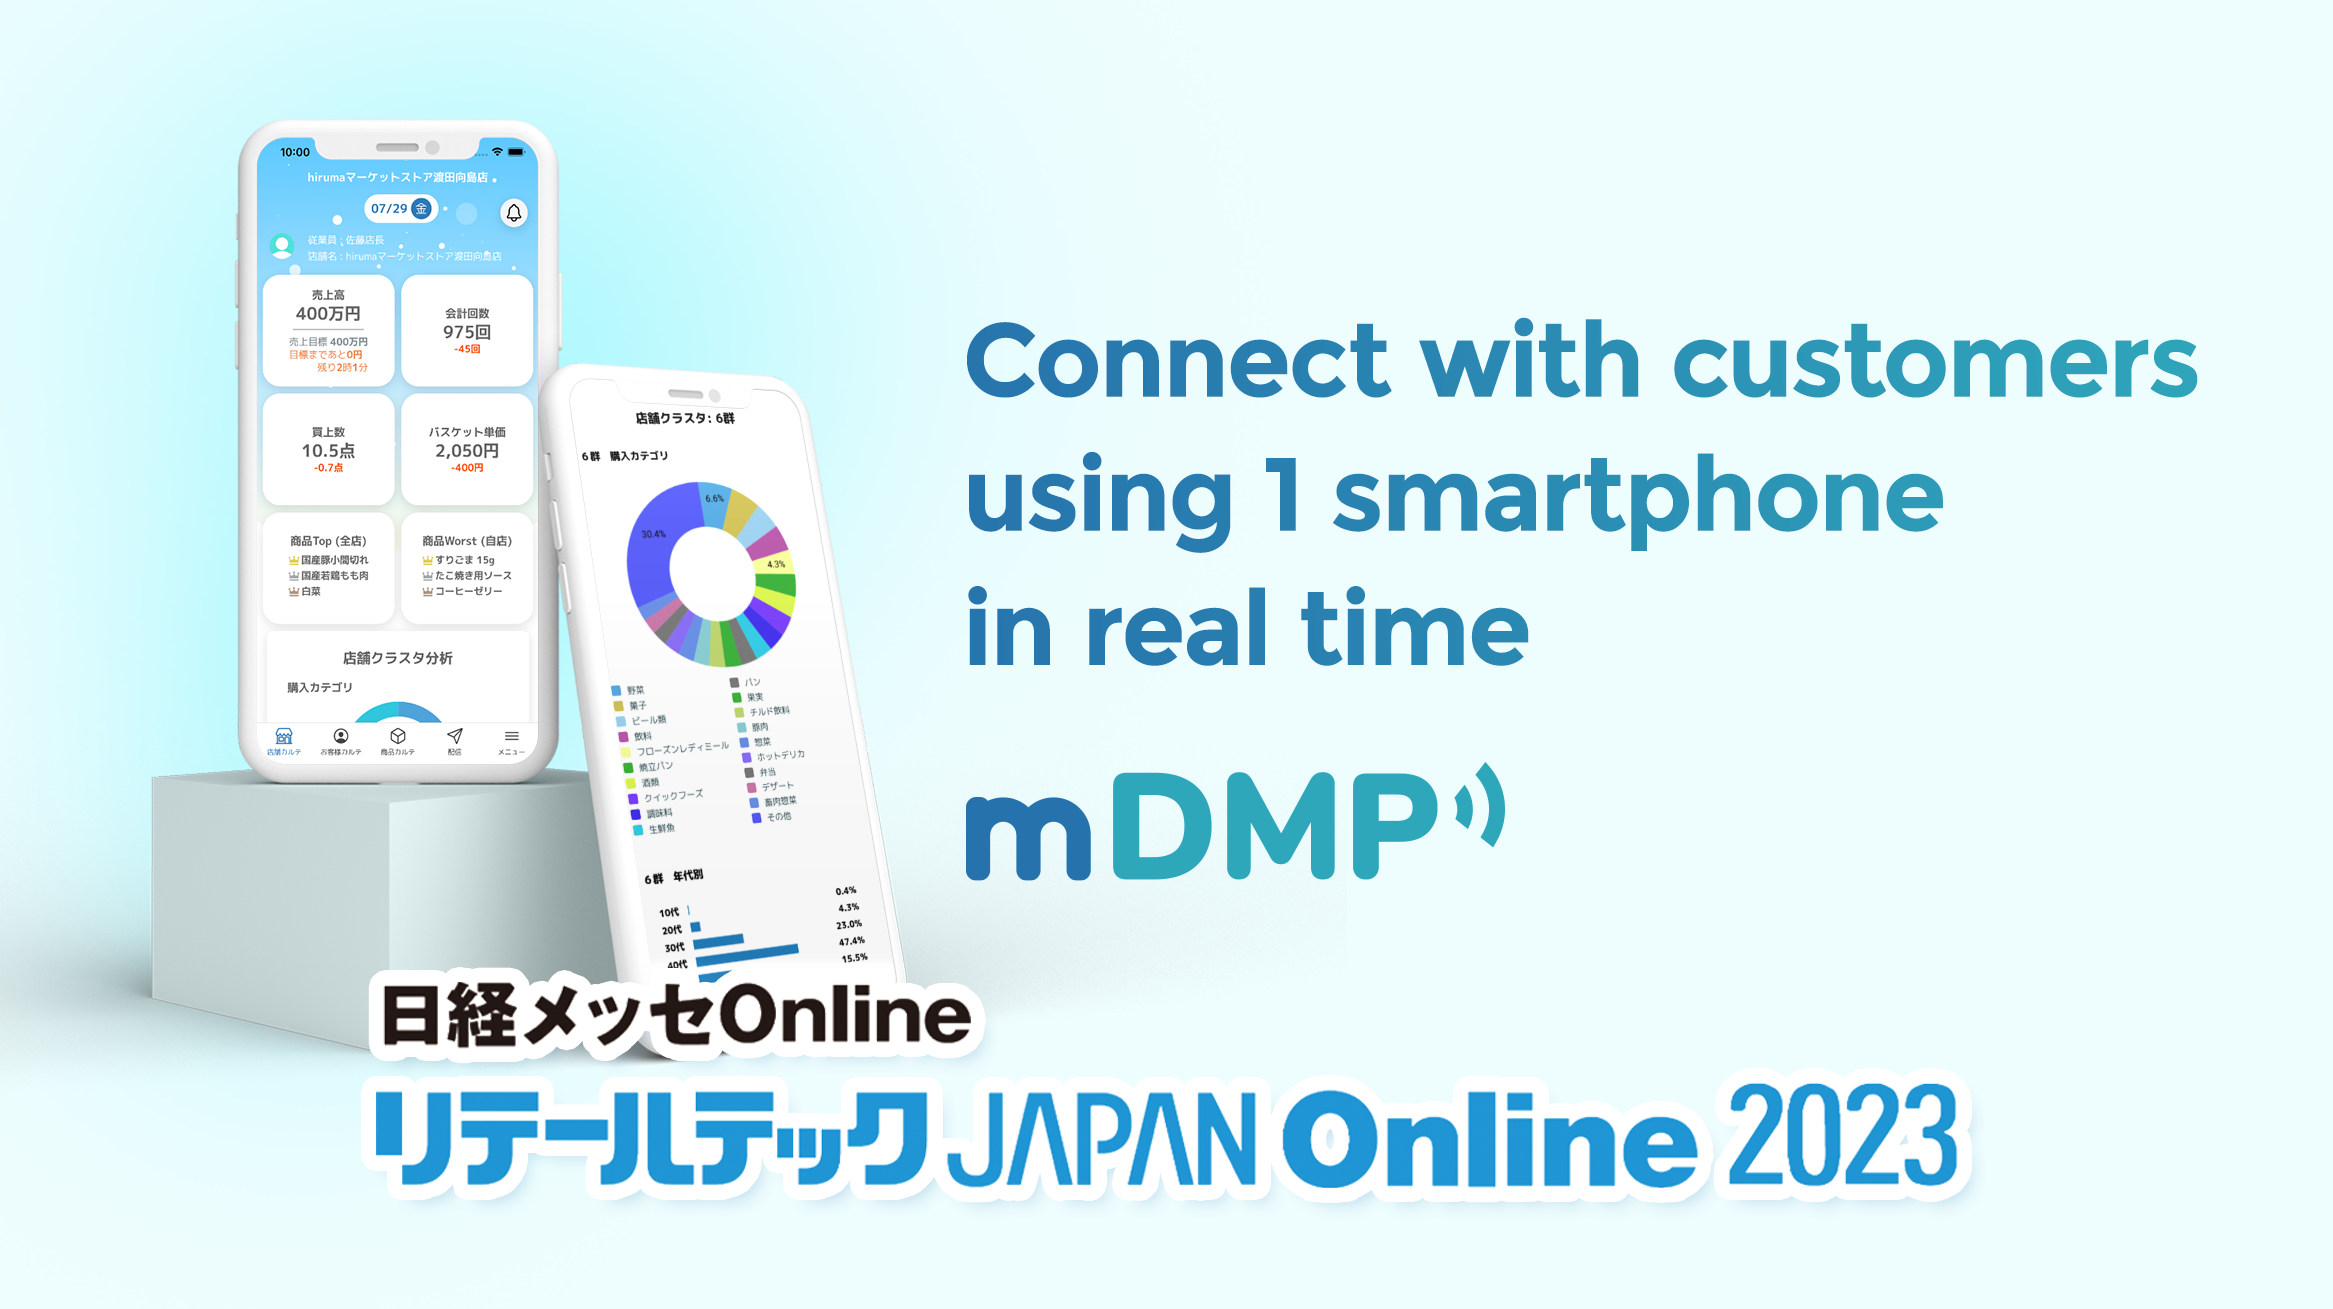 Connect with customers using 1 smartphone in real time